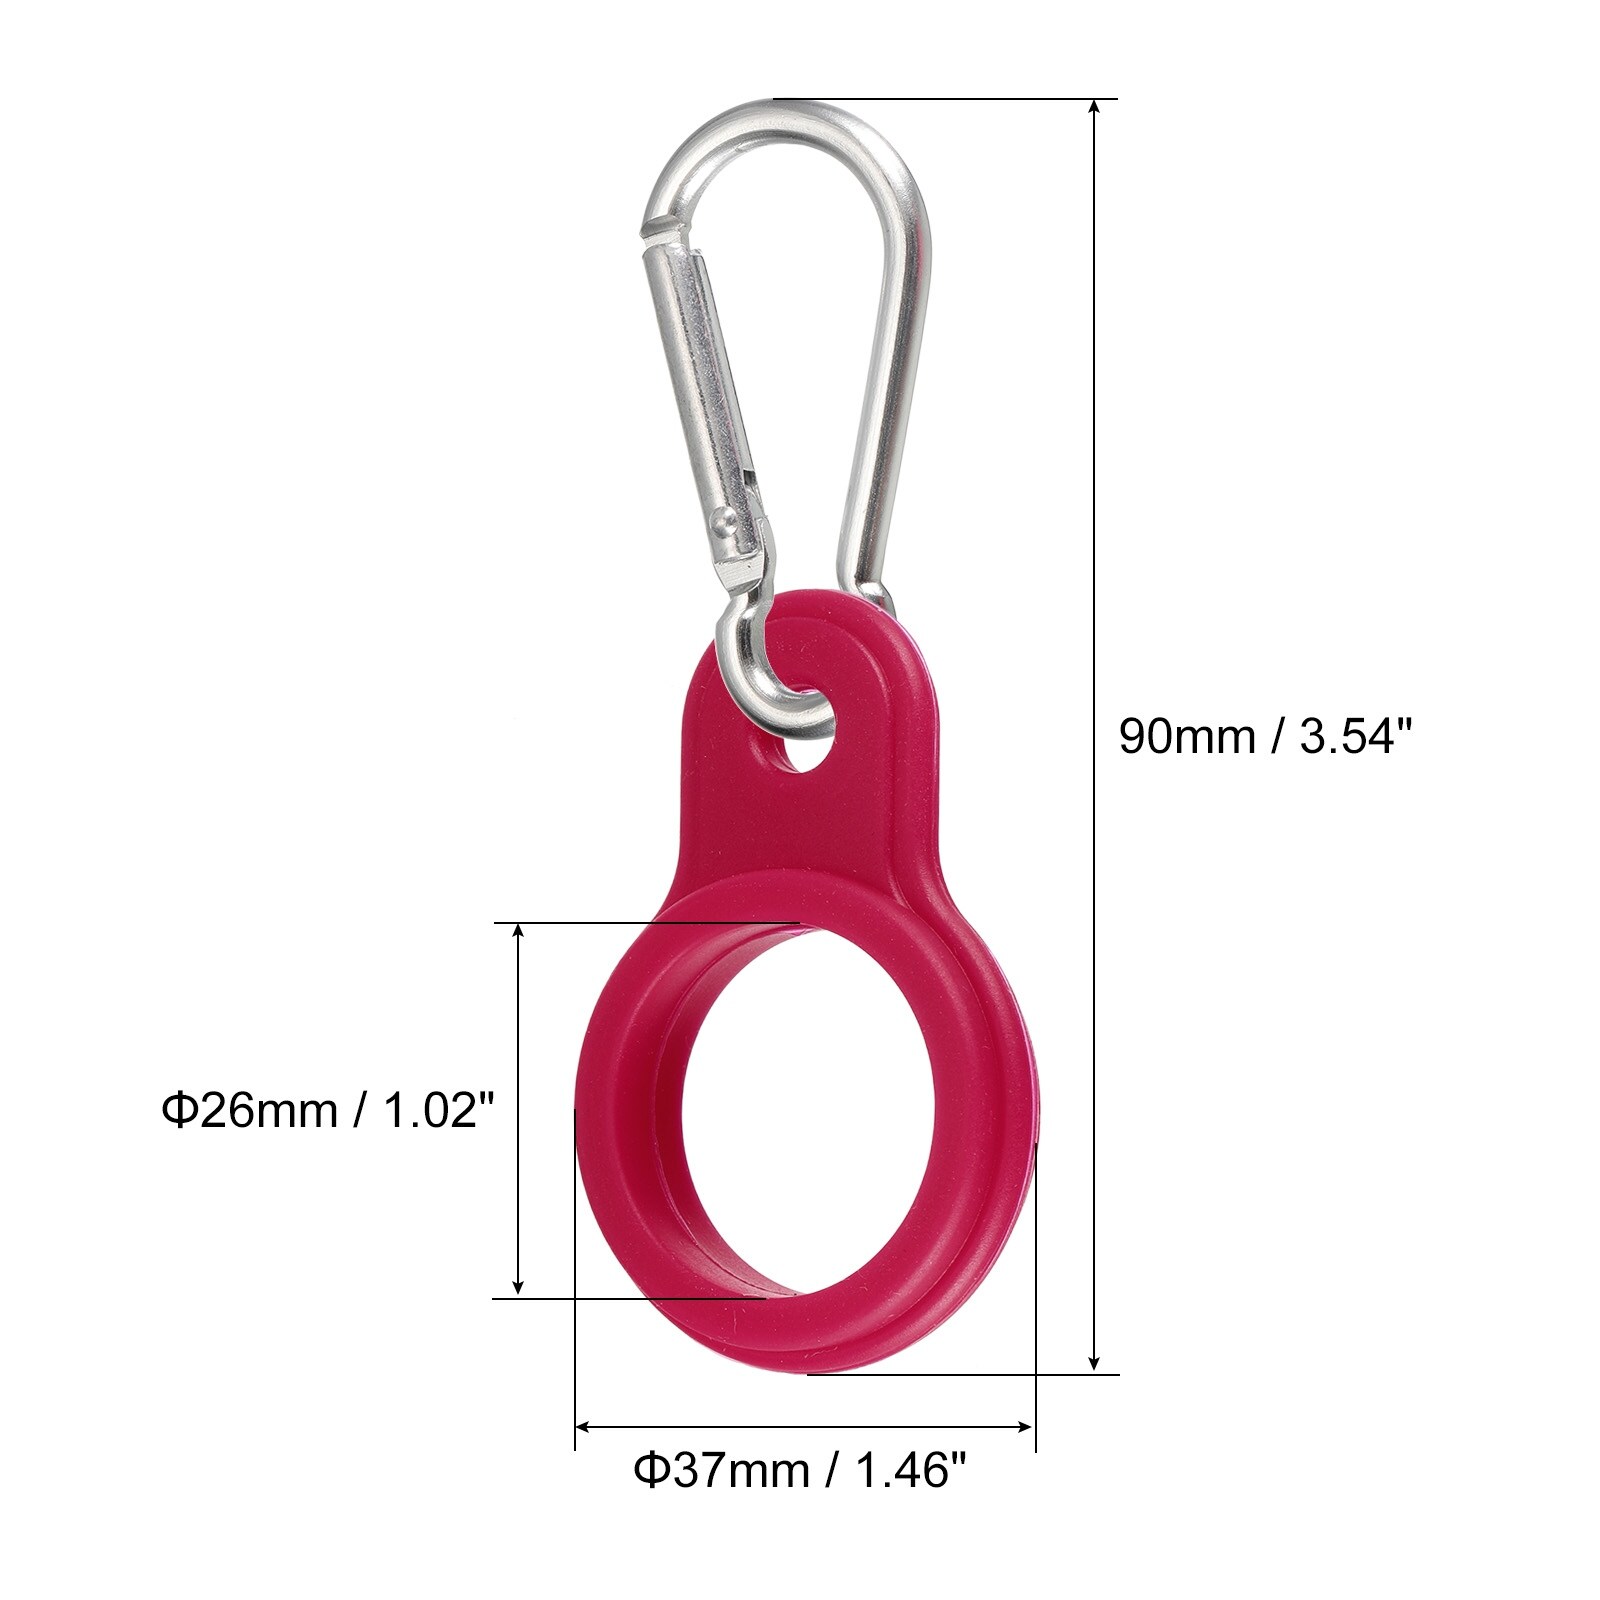 https://ak1.ostkcdn.com/images/products/is/images/direct/1ffddf74da2d2eee9d83b6b7ff330841690d26db/Silicone-Water-Bottle-Clip-with-Buckle-2pcs-Drink-Holder-Hook.jpg